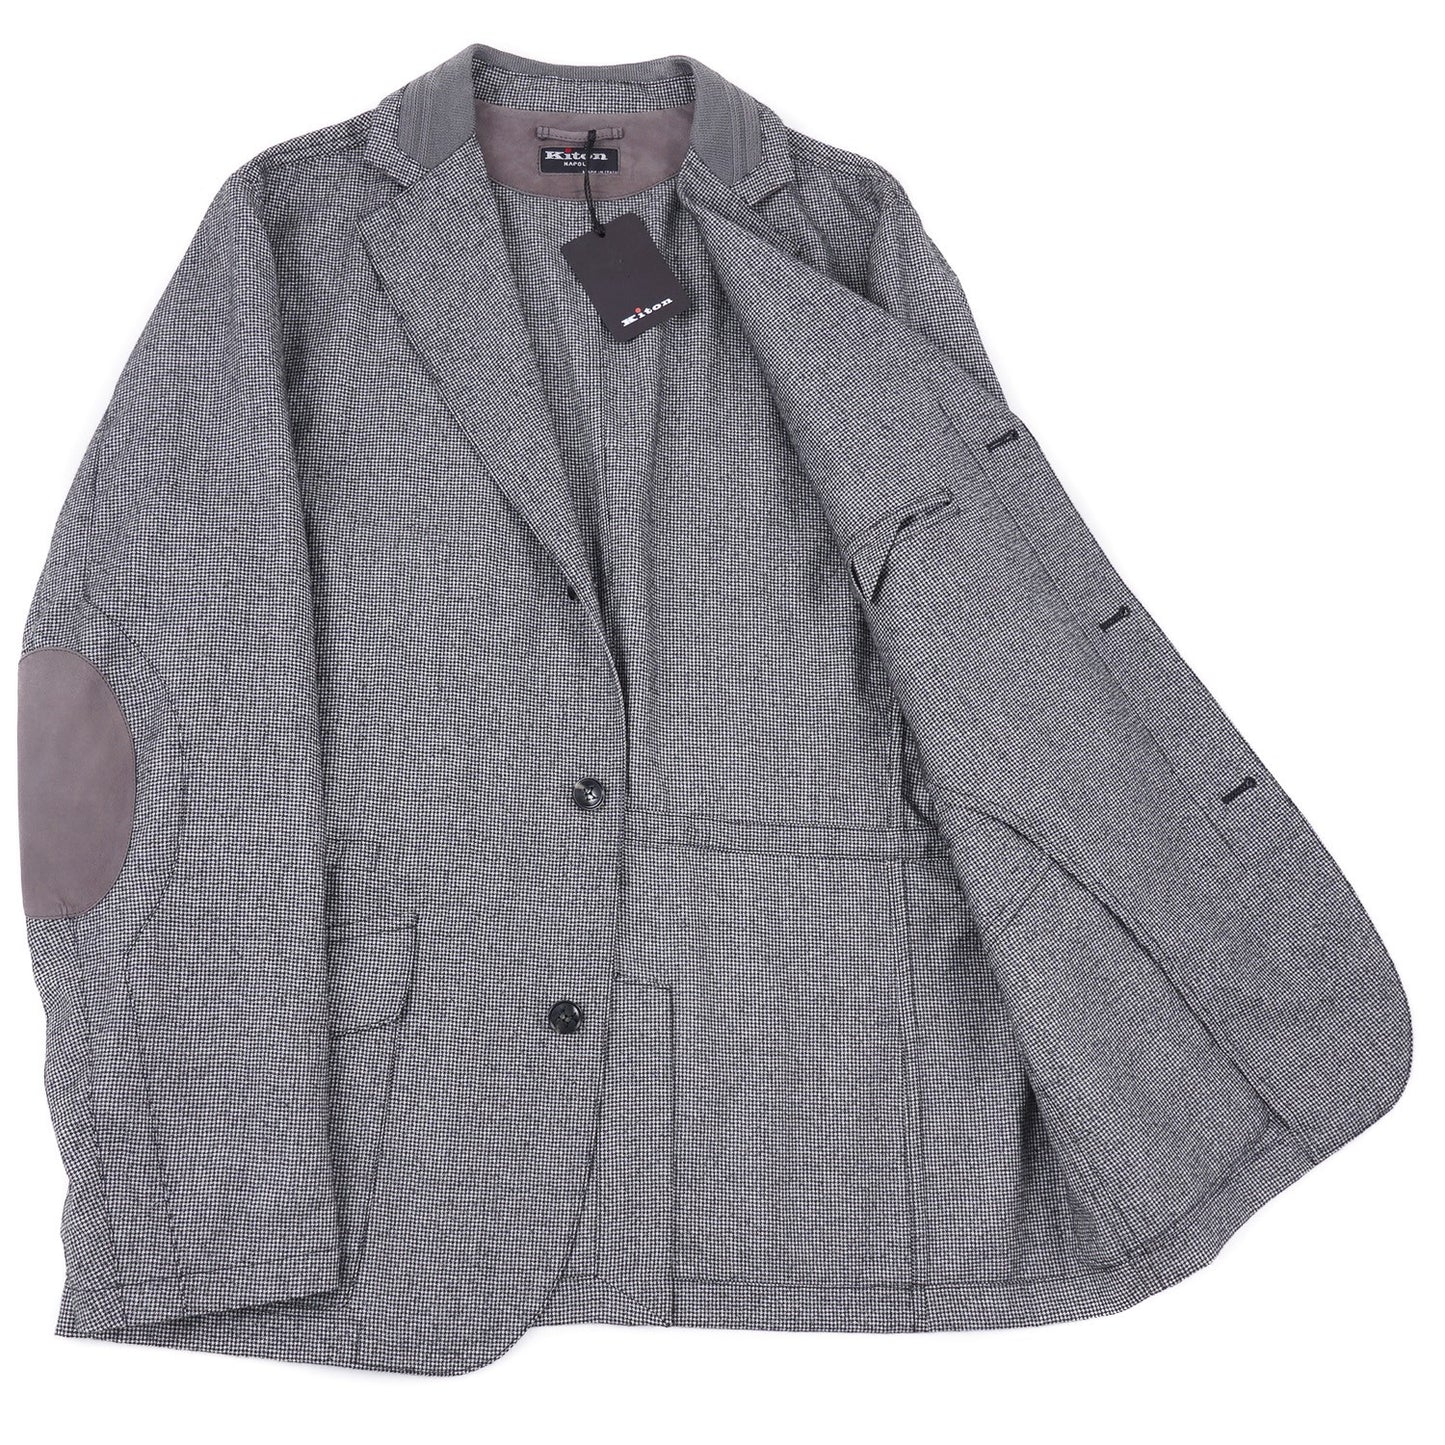 Kiton Cashmere Sport Coat with Suede Details - Top Shelf Apparel